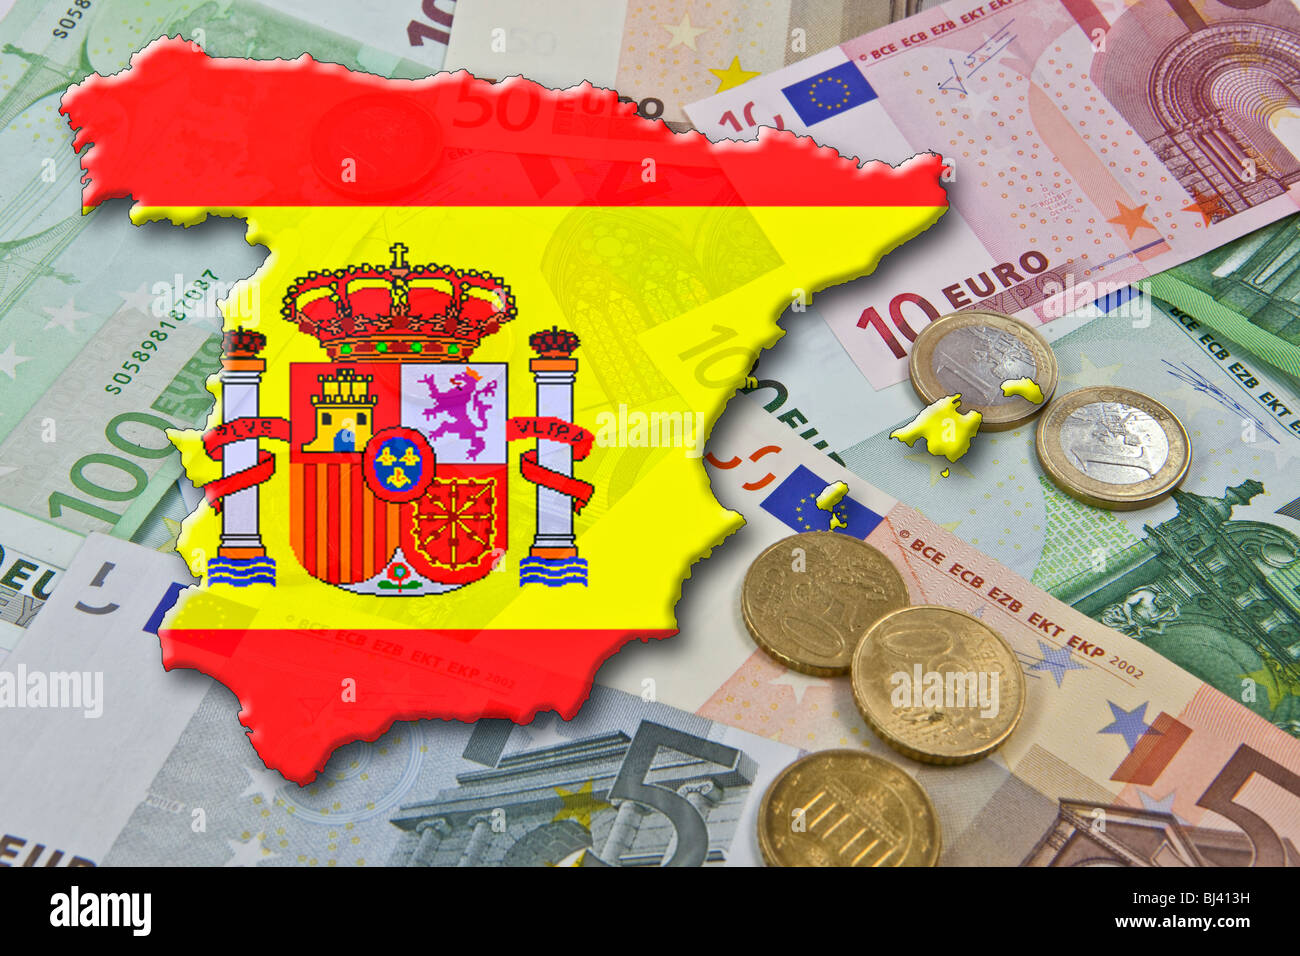 Euros and Spain, euro stability pact, Spain as a euro 'deficit sinner' Stock Photo